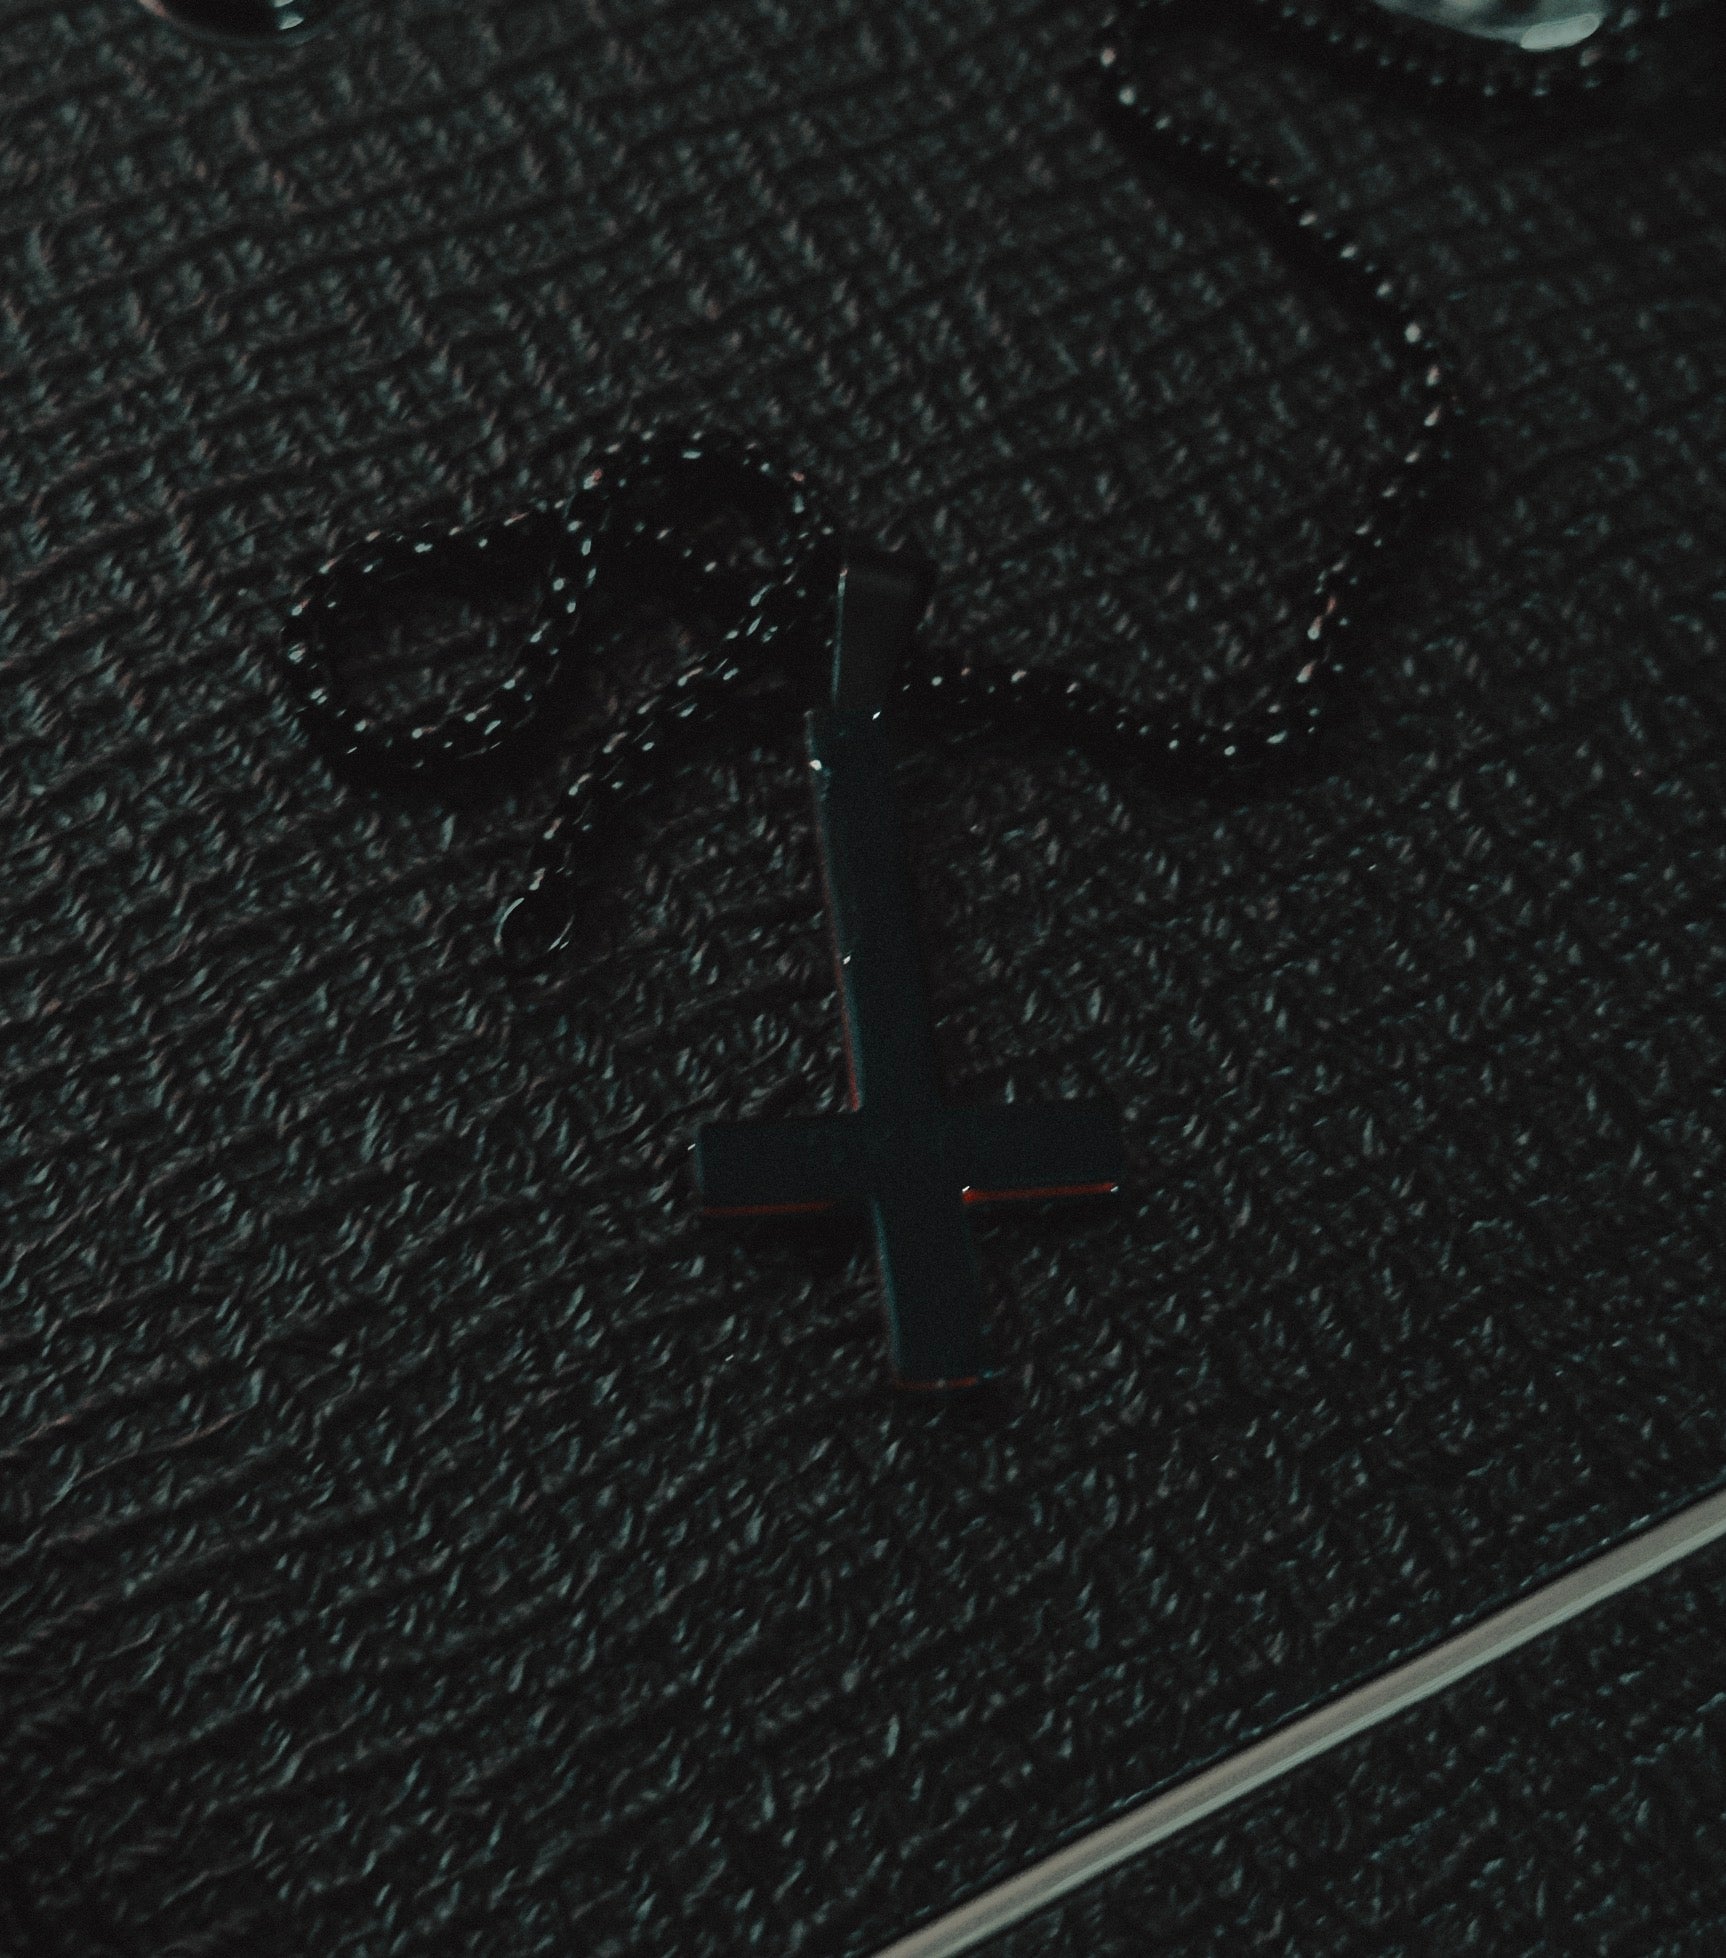 SKYR Satanic Inverted Cross Necklace - Black with Red Bevel